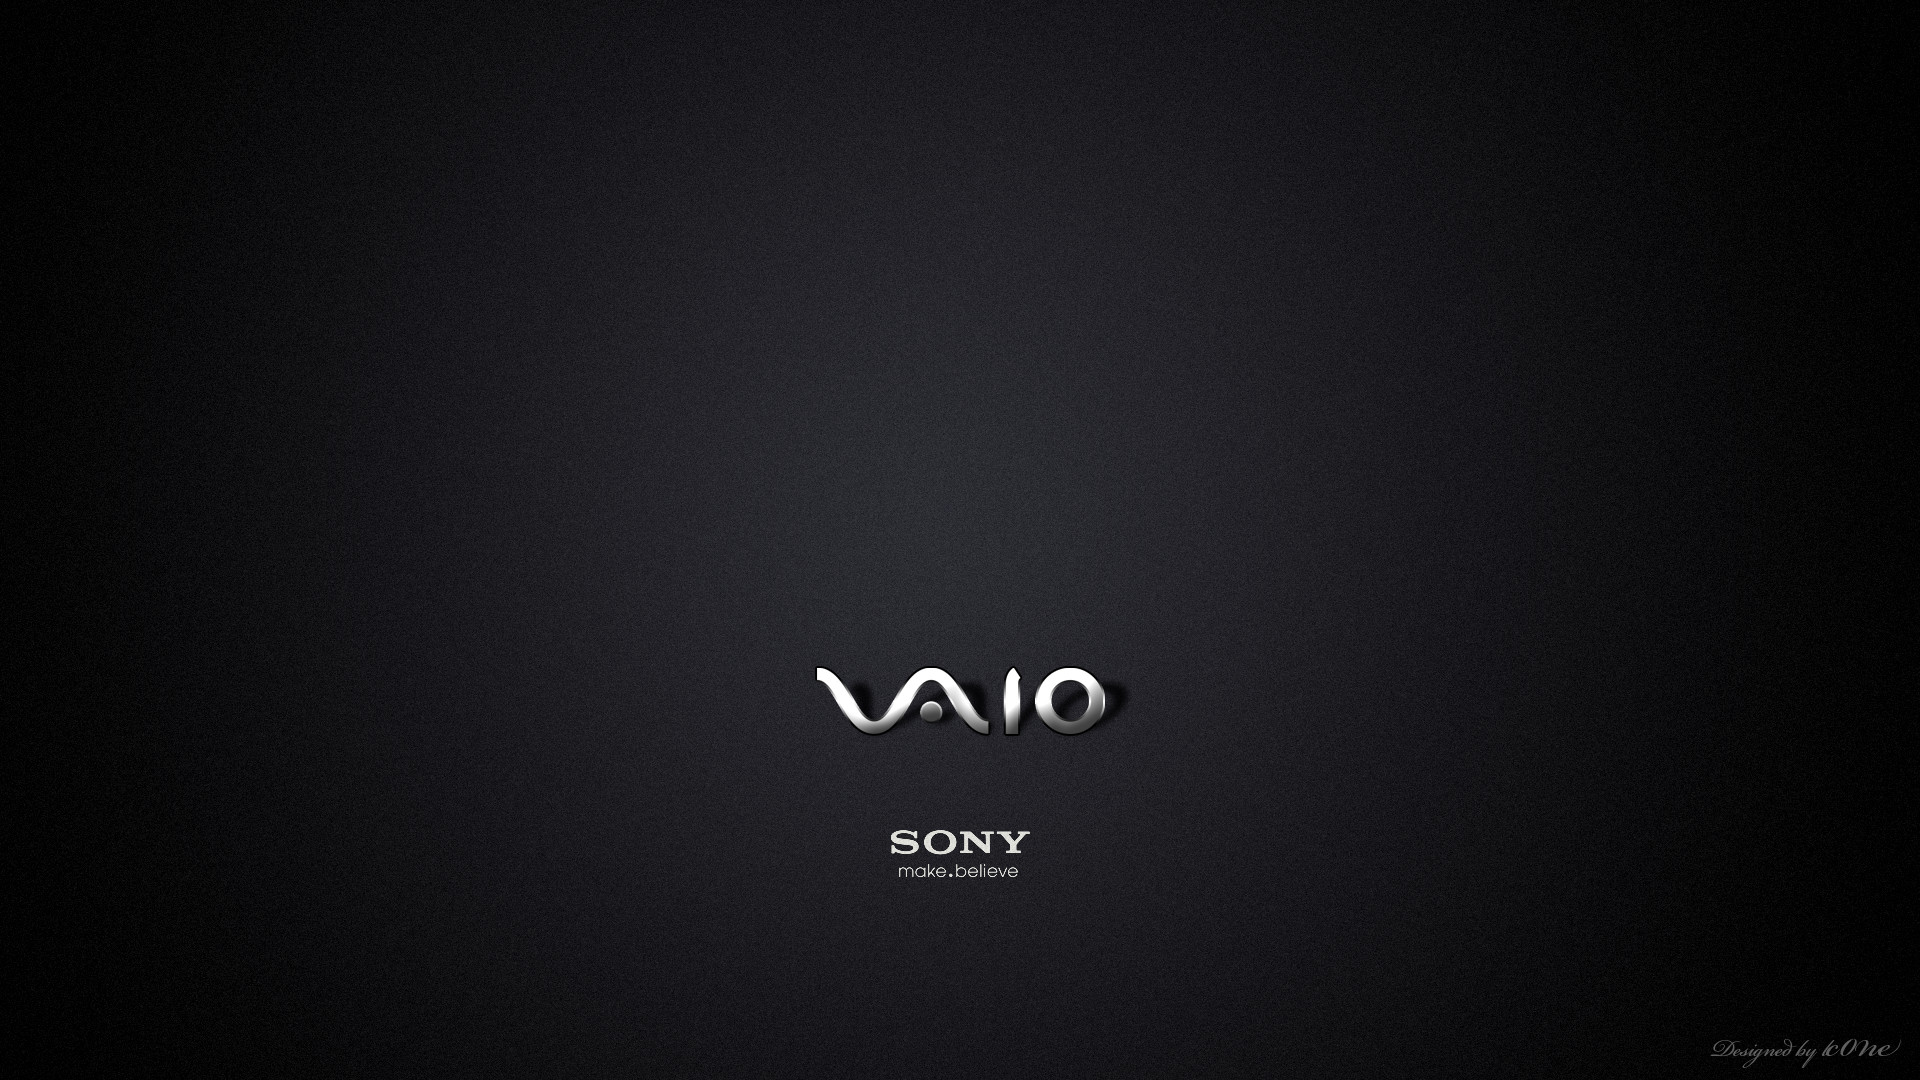 1920x1080 Sony Vaio Wallpapers - Wallpaper Cave 37 Sony Vaio Wallpapers, HD Sony Vaio  Wallpapers and Photos .